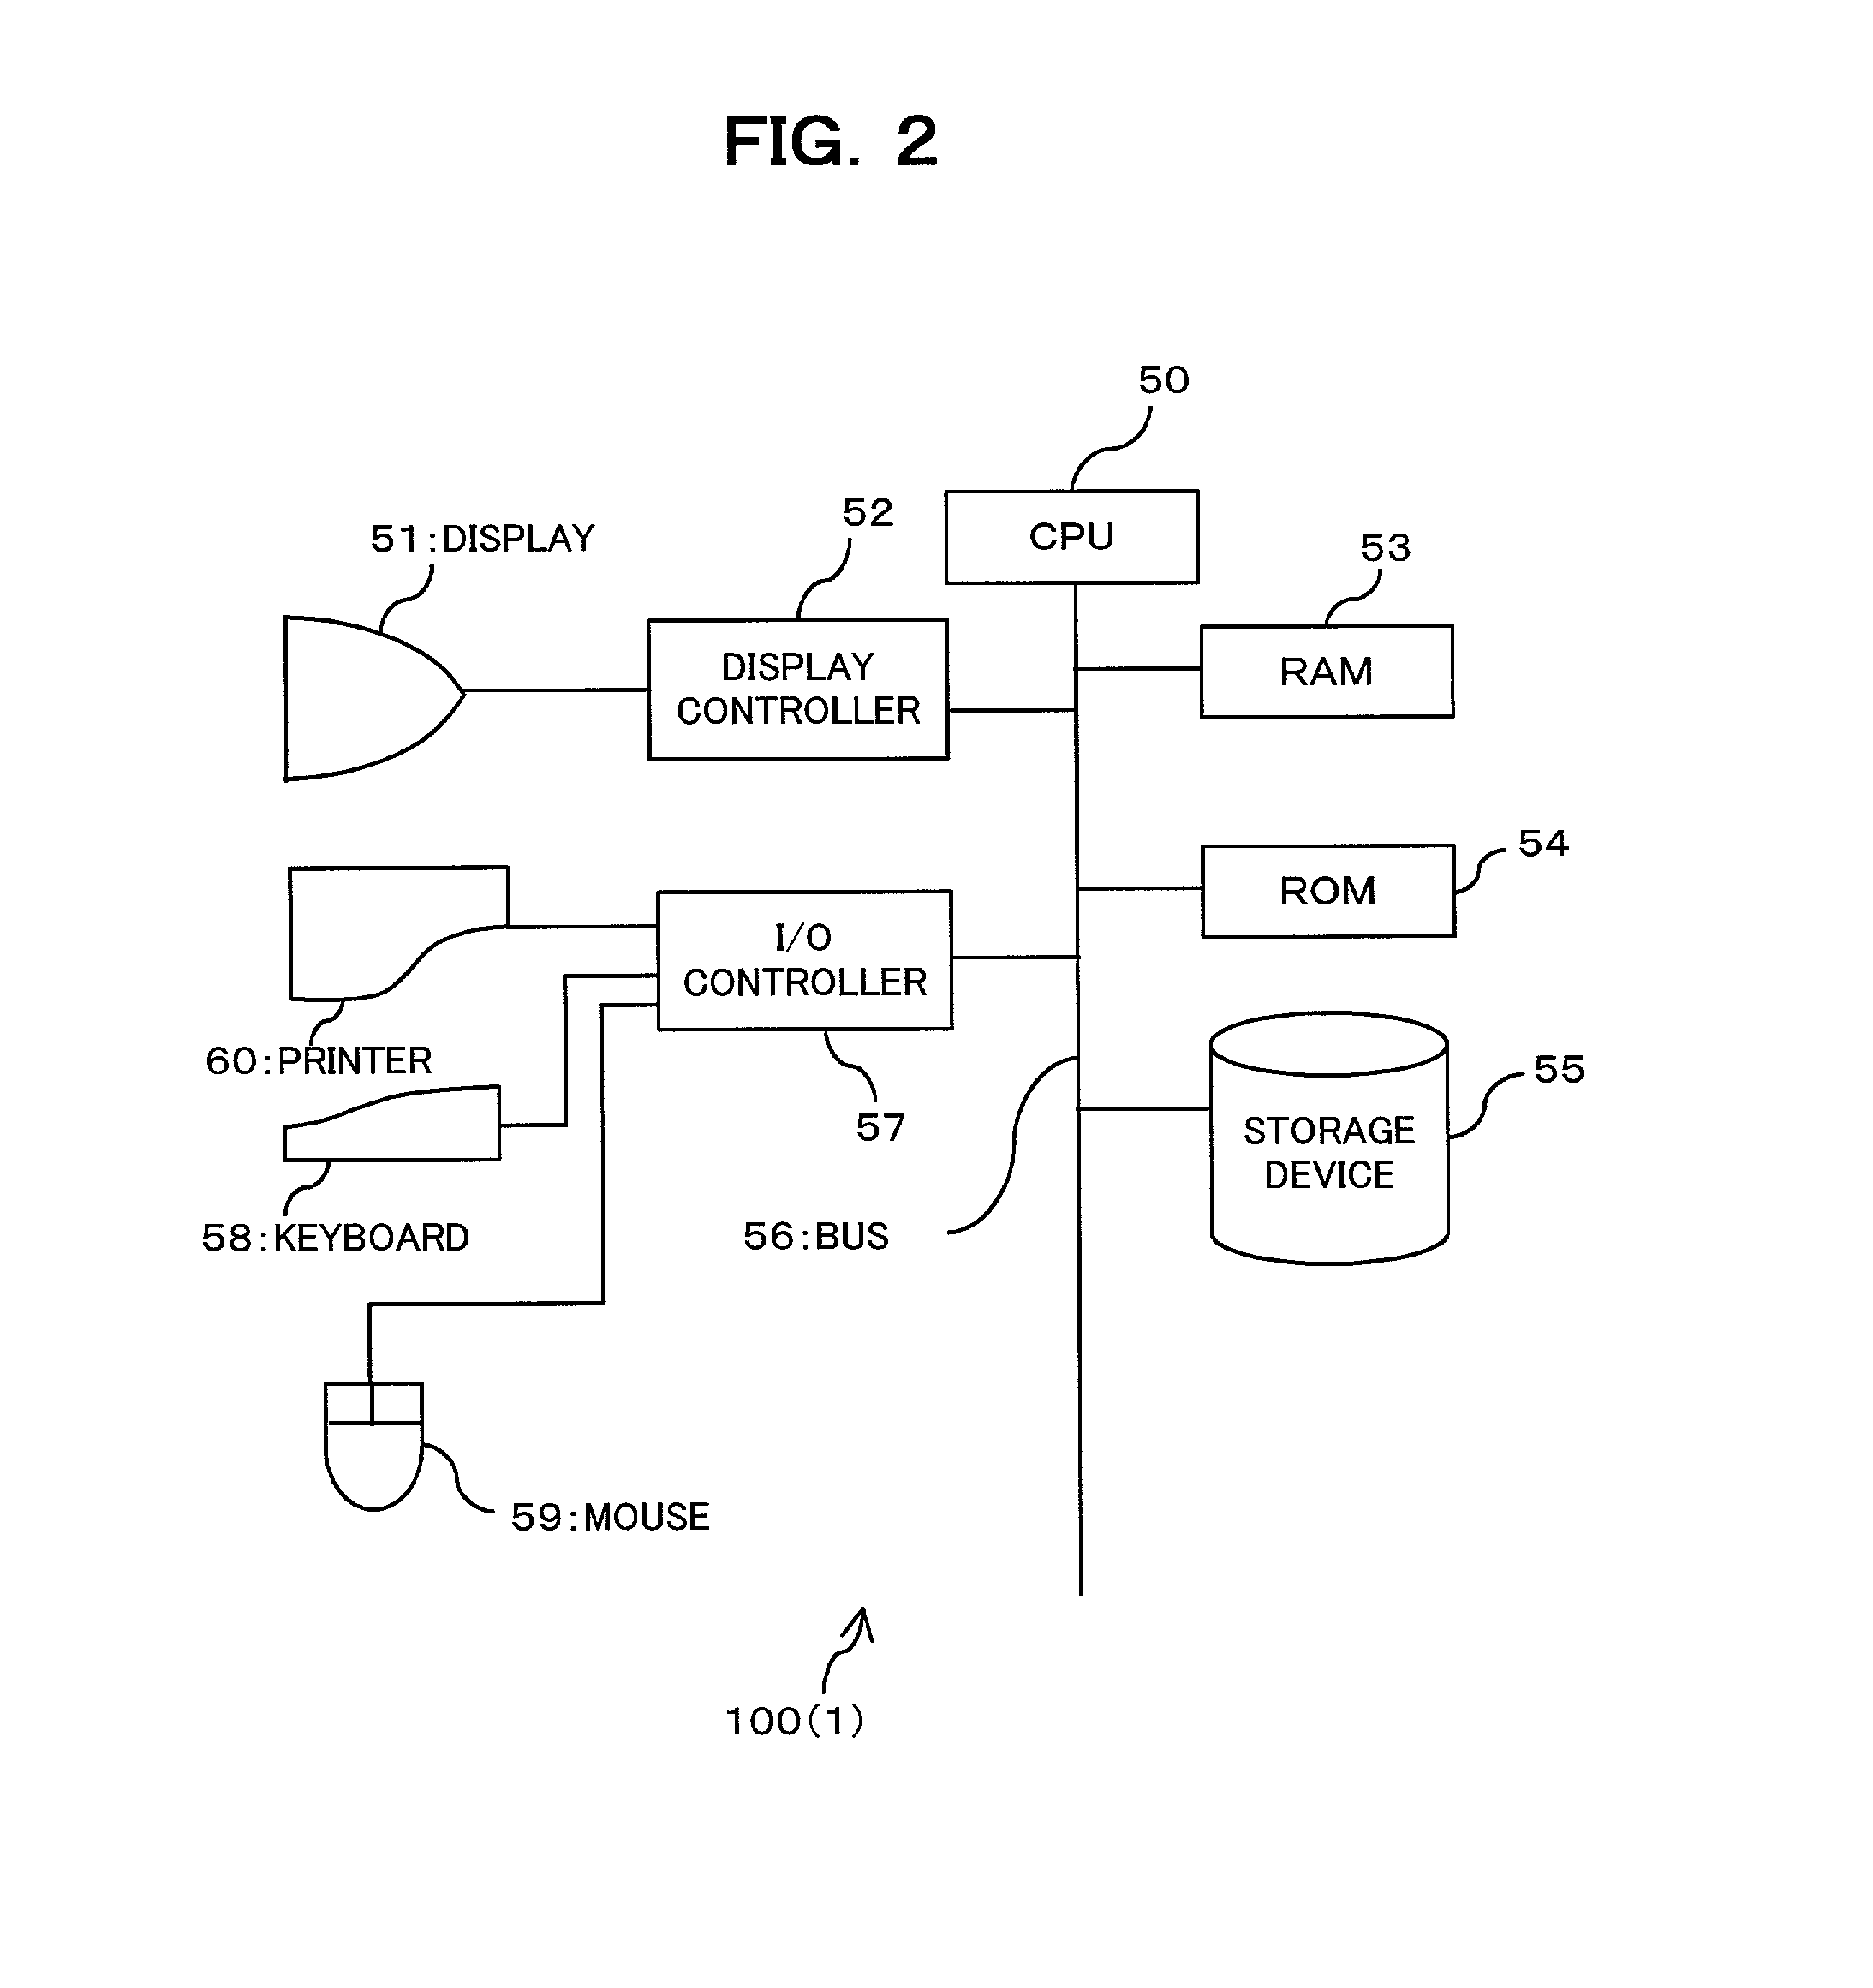 Binary-coding pattern creating method and apparatus, Binary-coding pattern, and computer-readable recording medium in which Binary-coding pattern creating program is recorded